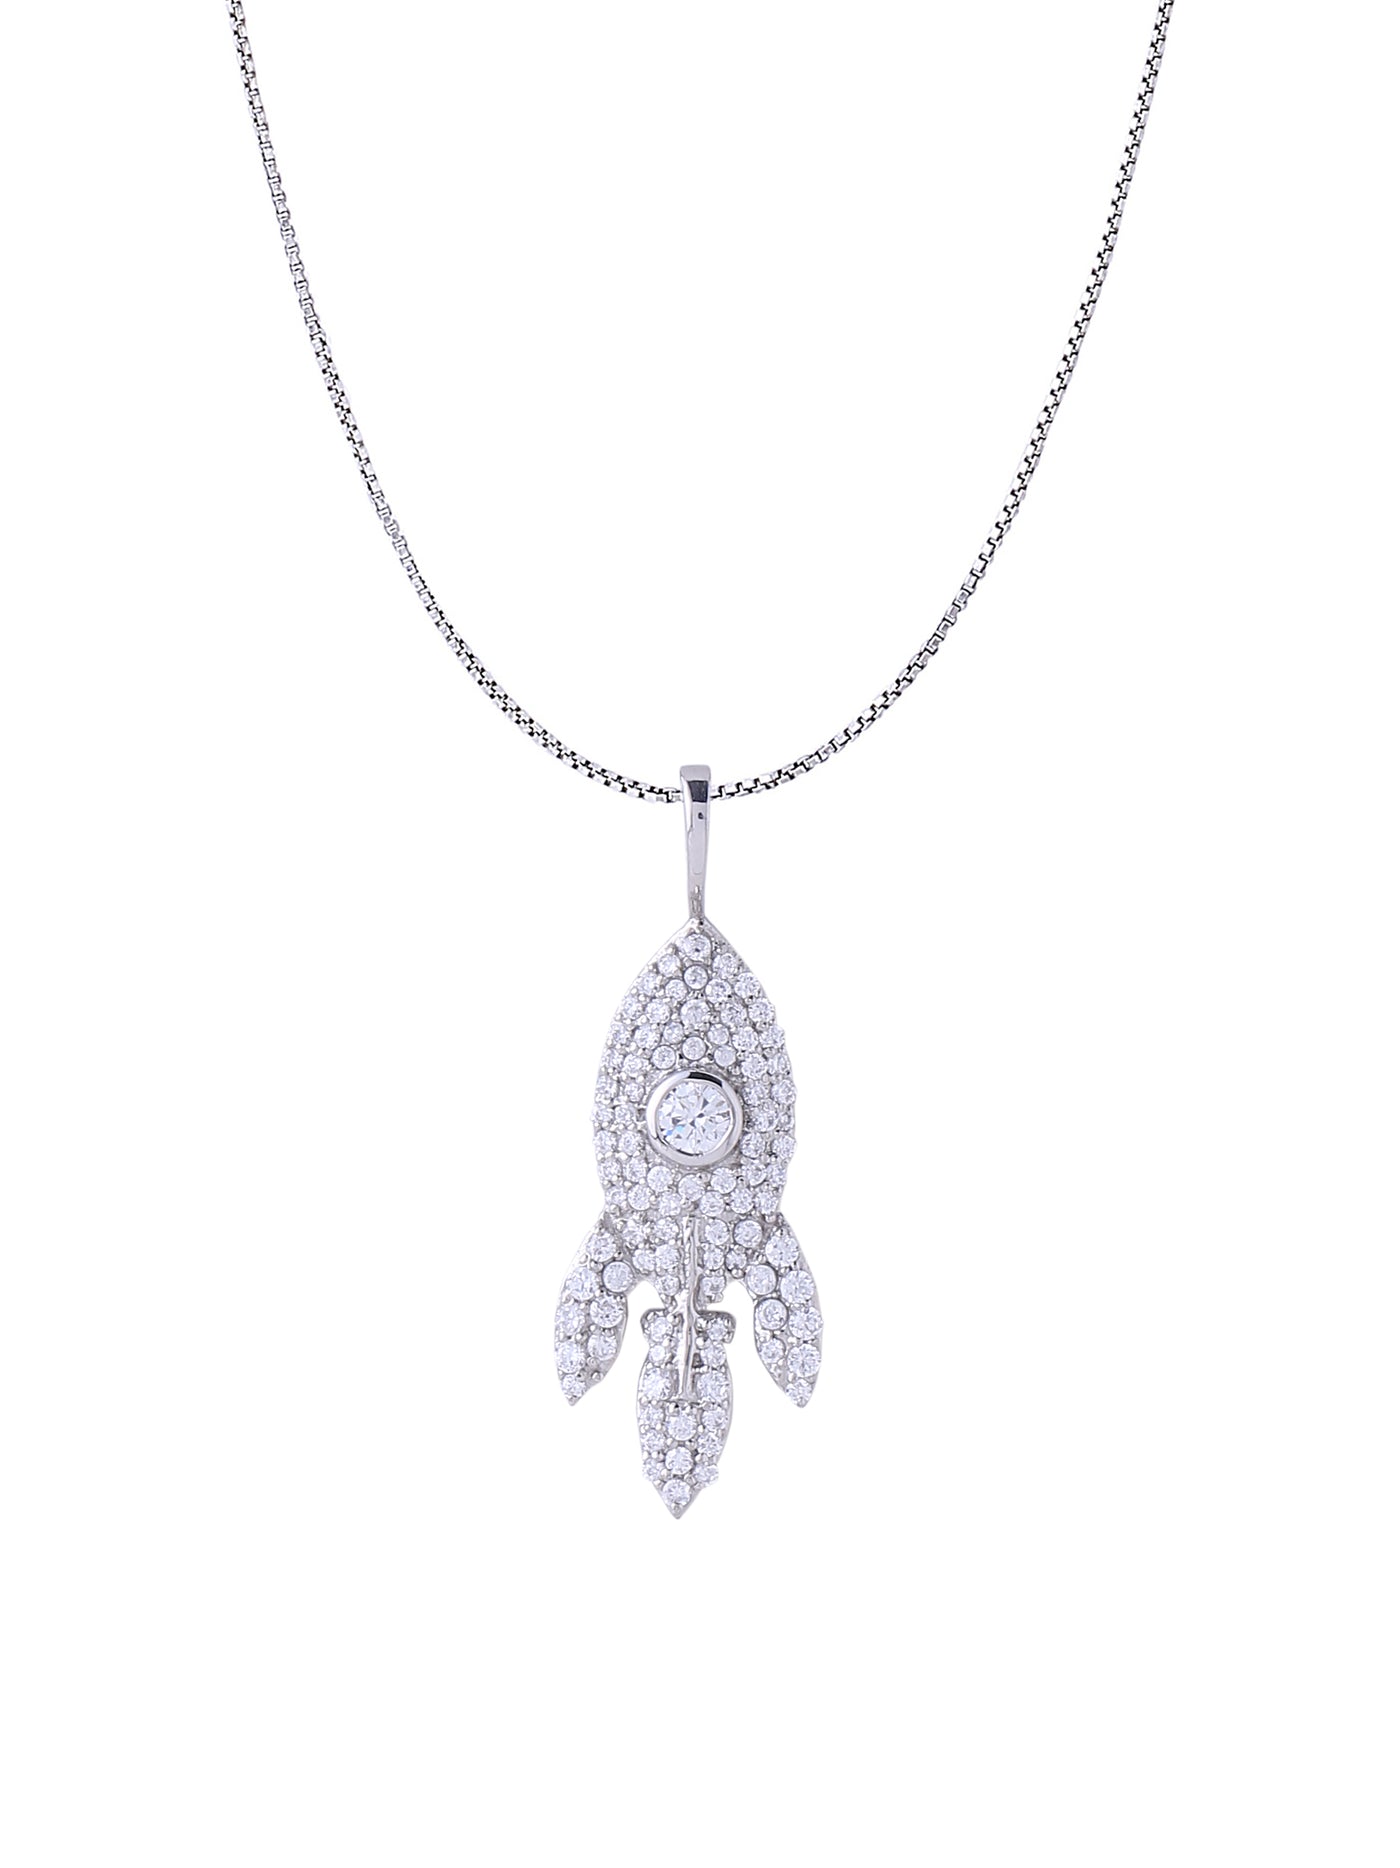 White Gold Color Rocket Pendant Made of 925 Sterling Silver Material with 20 Inch Long Chain